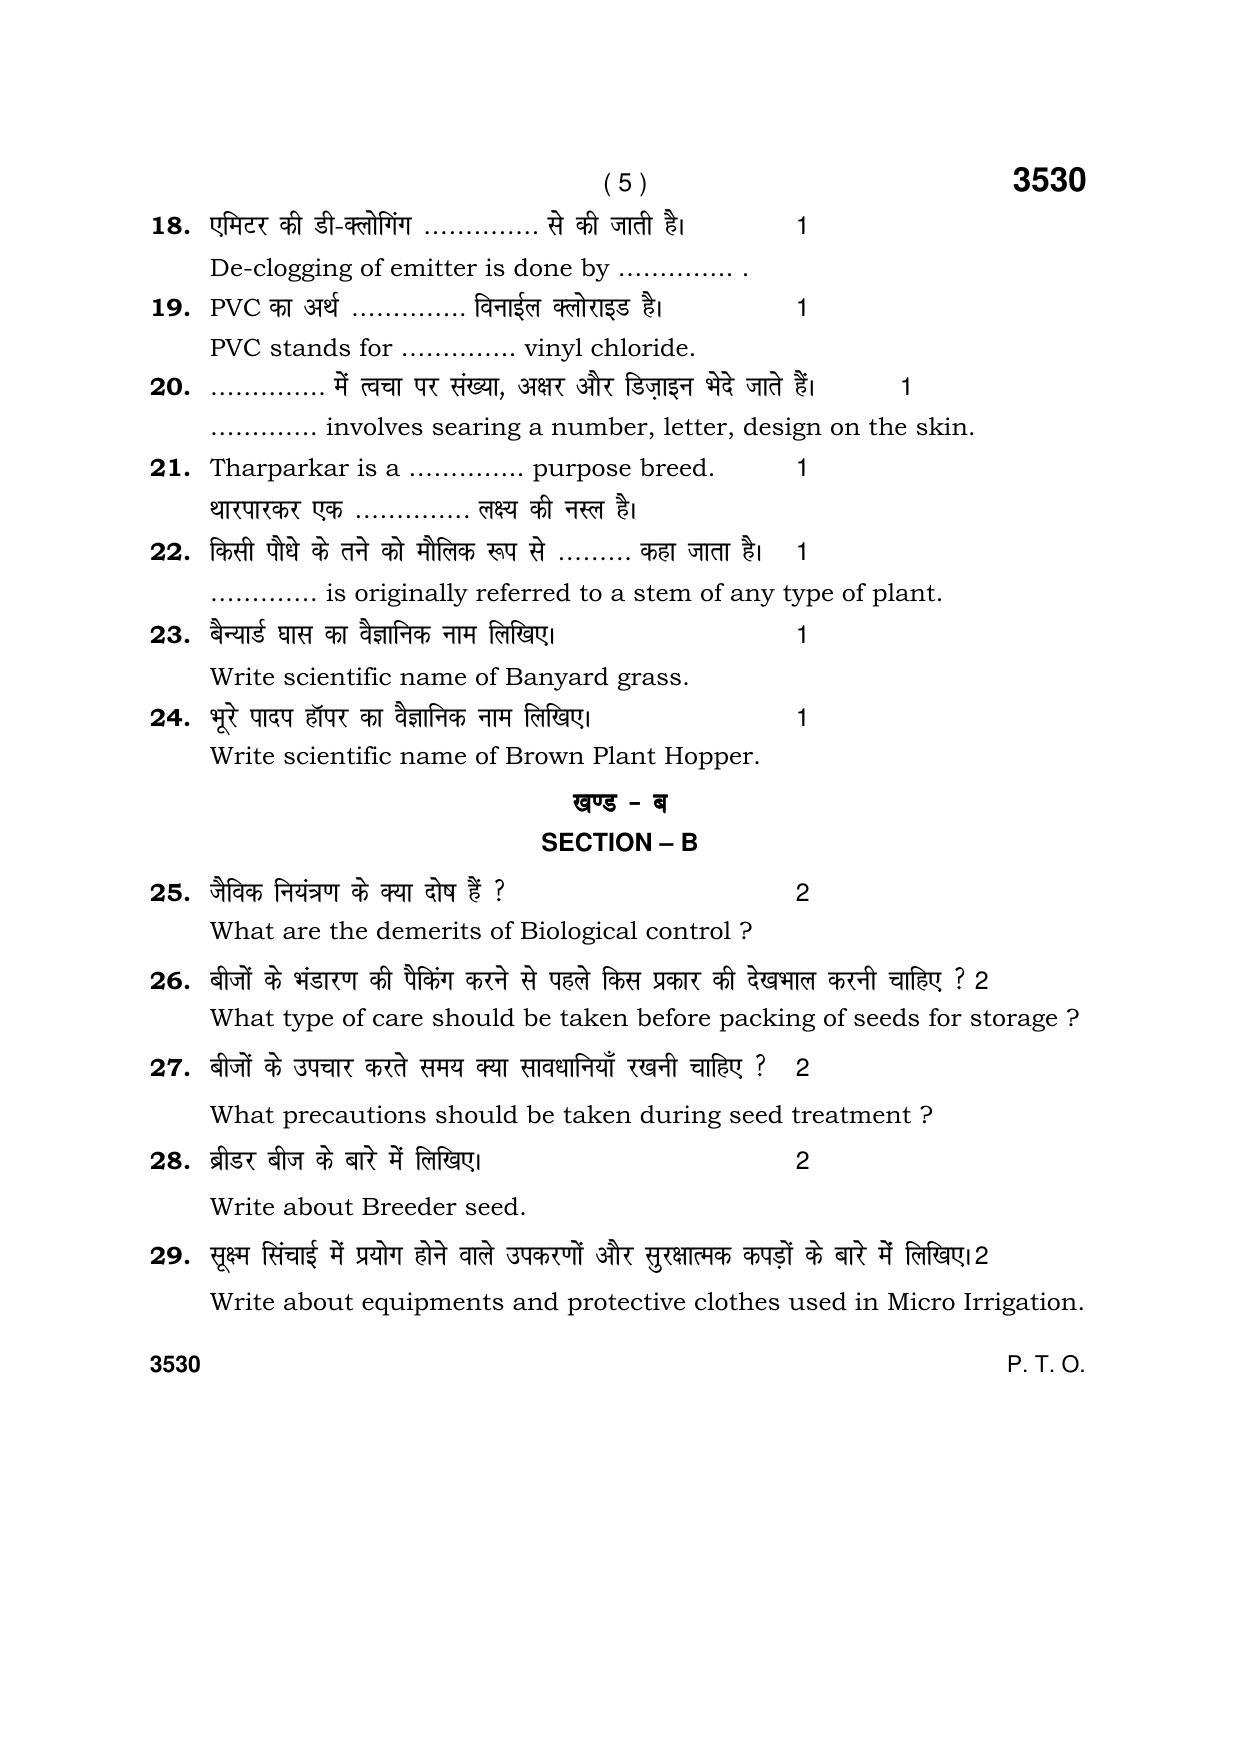 Haryana Board HBSE Class 10 Agriculture Paddy Farming 2018 Question Paper - Page 5